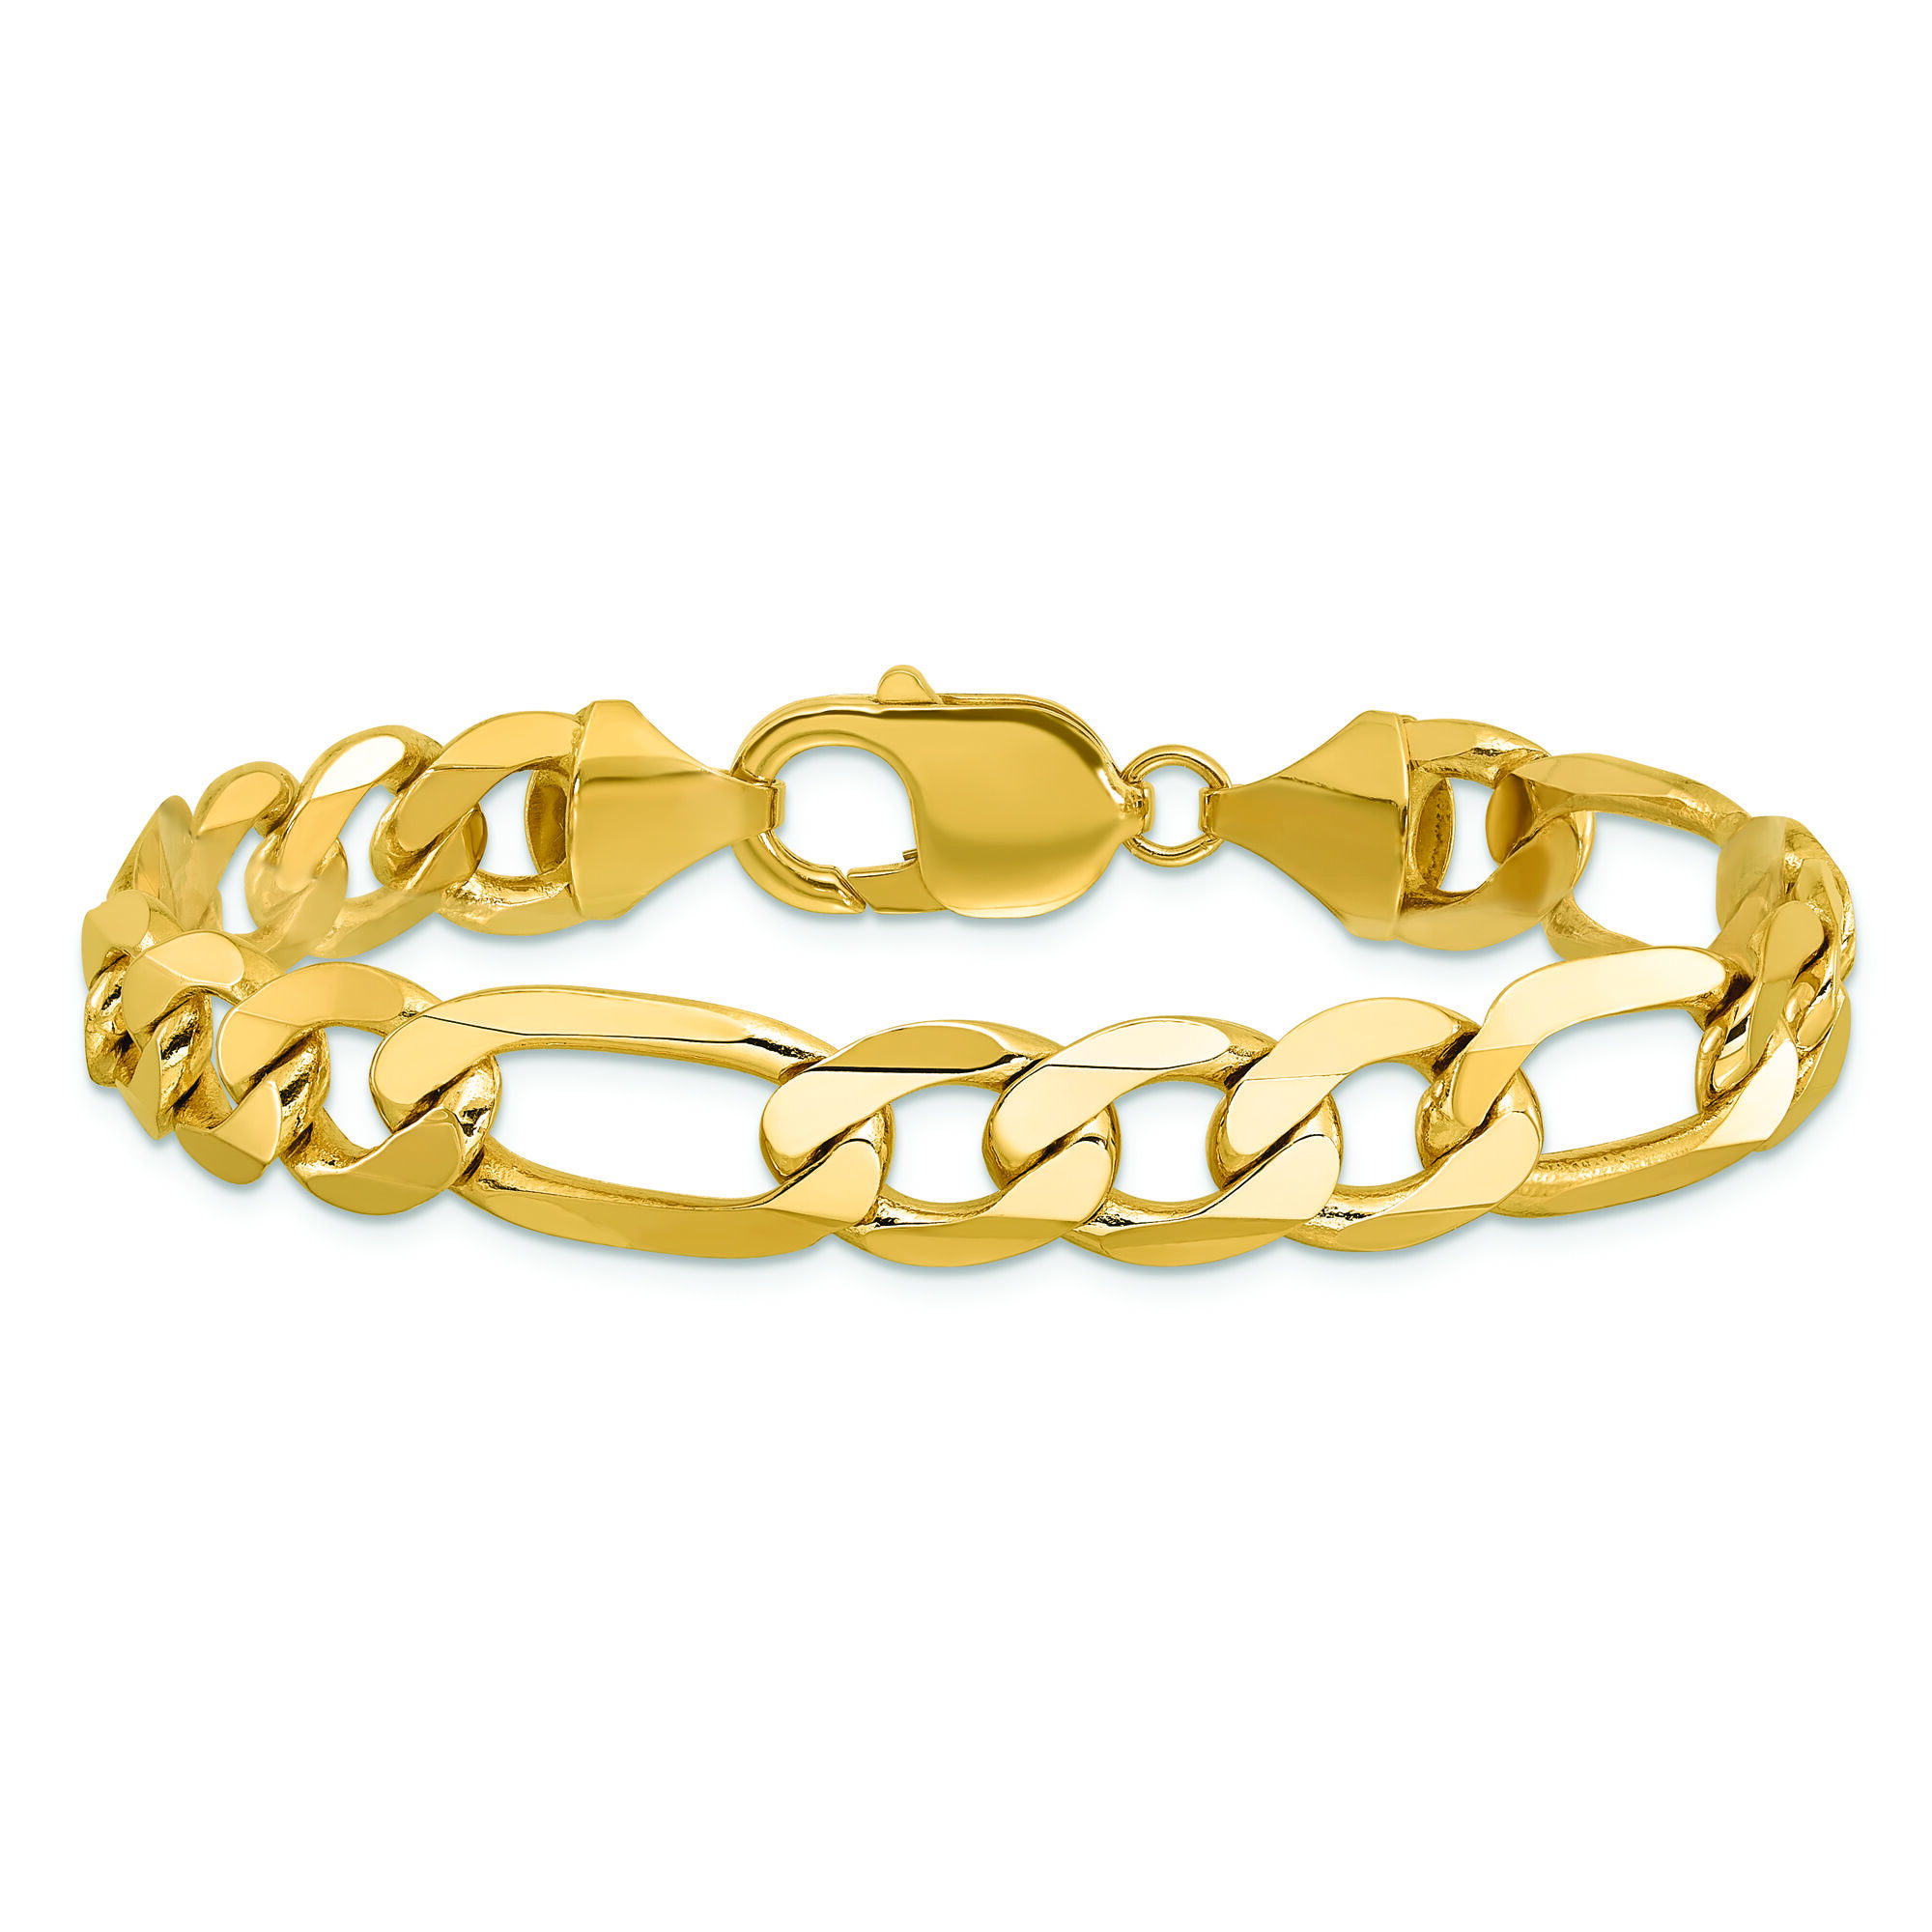 Buy 18k Gold Figaro Bracelet. 8mm. Heavy Gold Chain. REAL GOLD. Worldwide  Free Shipping. 750 Certified & Stamped. Best Birthday/anniversary Gift  Online in India - Etsy